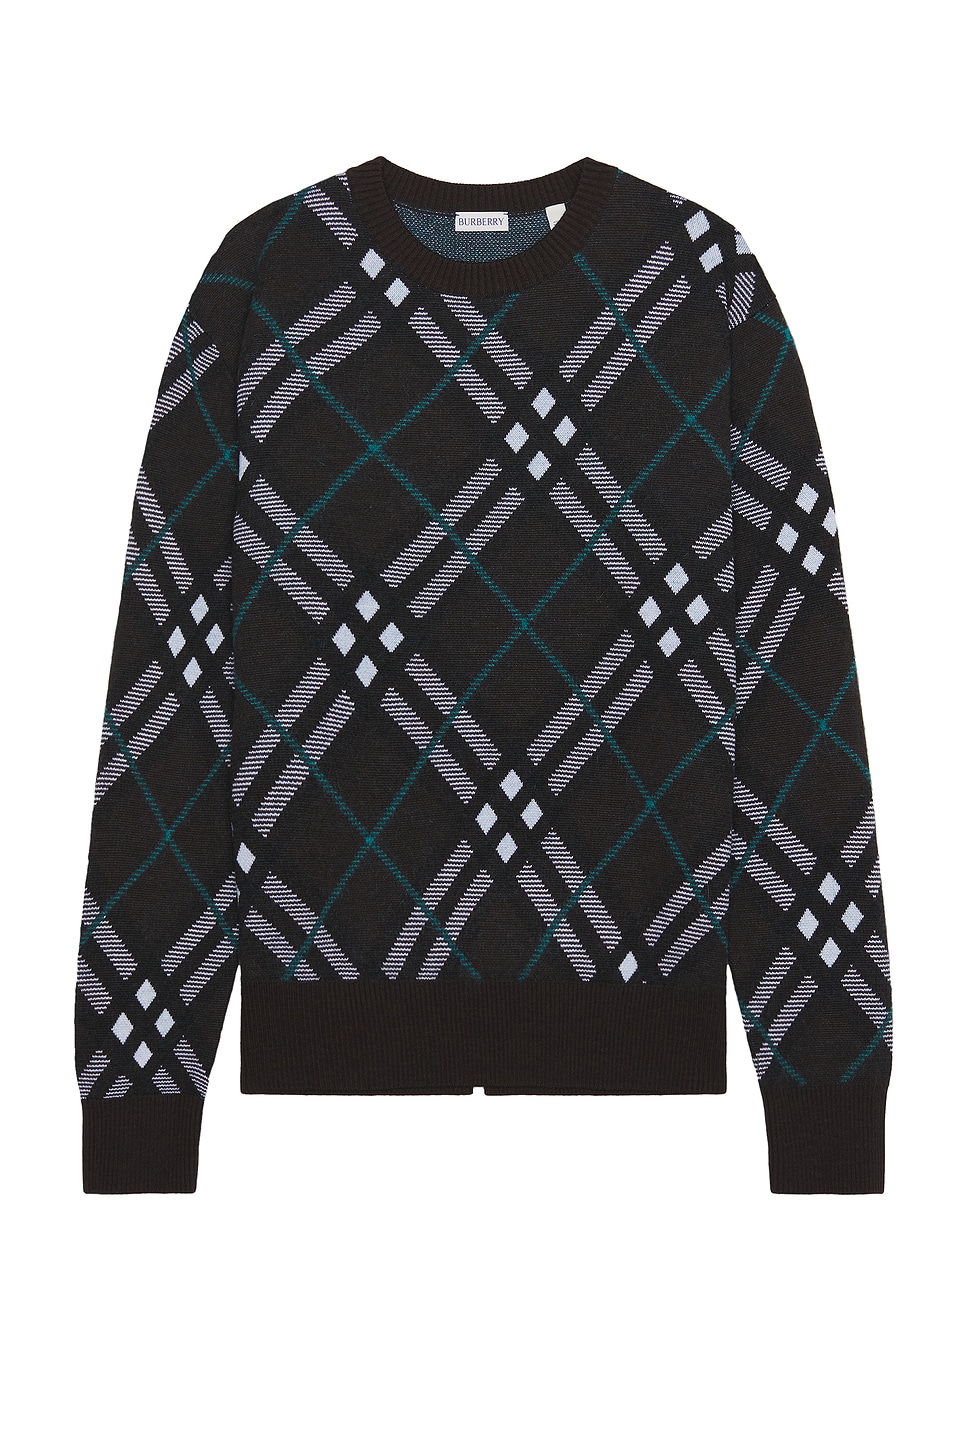 Image 1 of Burberry IP Check Sweater in Snug IP Check